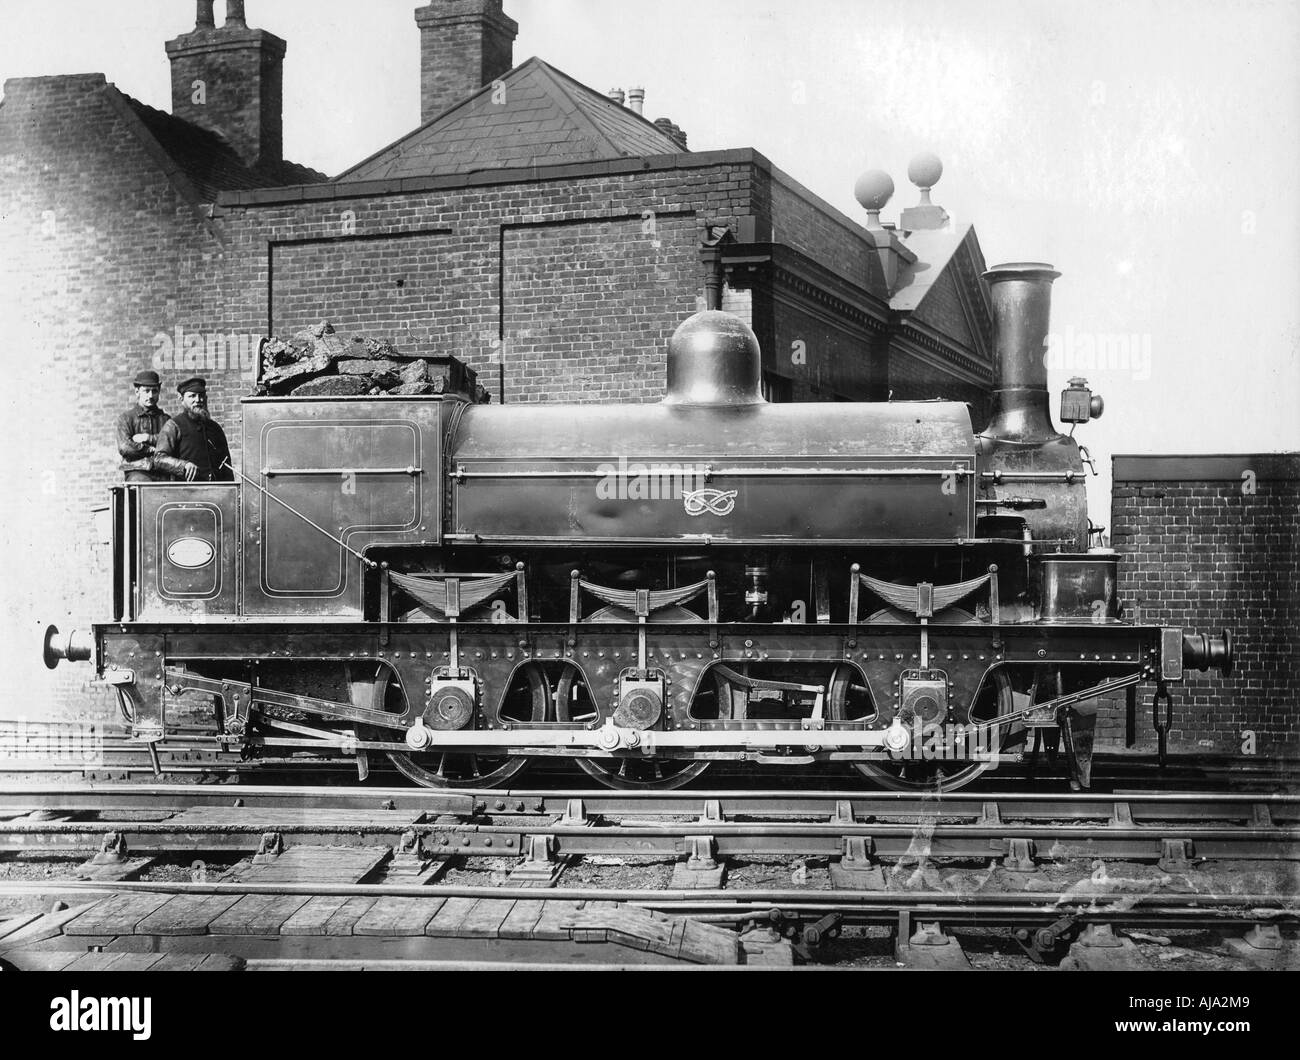 North Staffordshire 0-6-0 steam locomotive with driver and fireman on the footplate, 19th century. Artist: Unknown Stock Photo